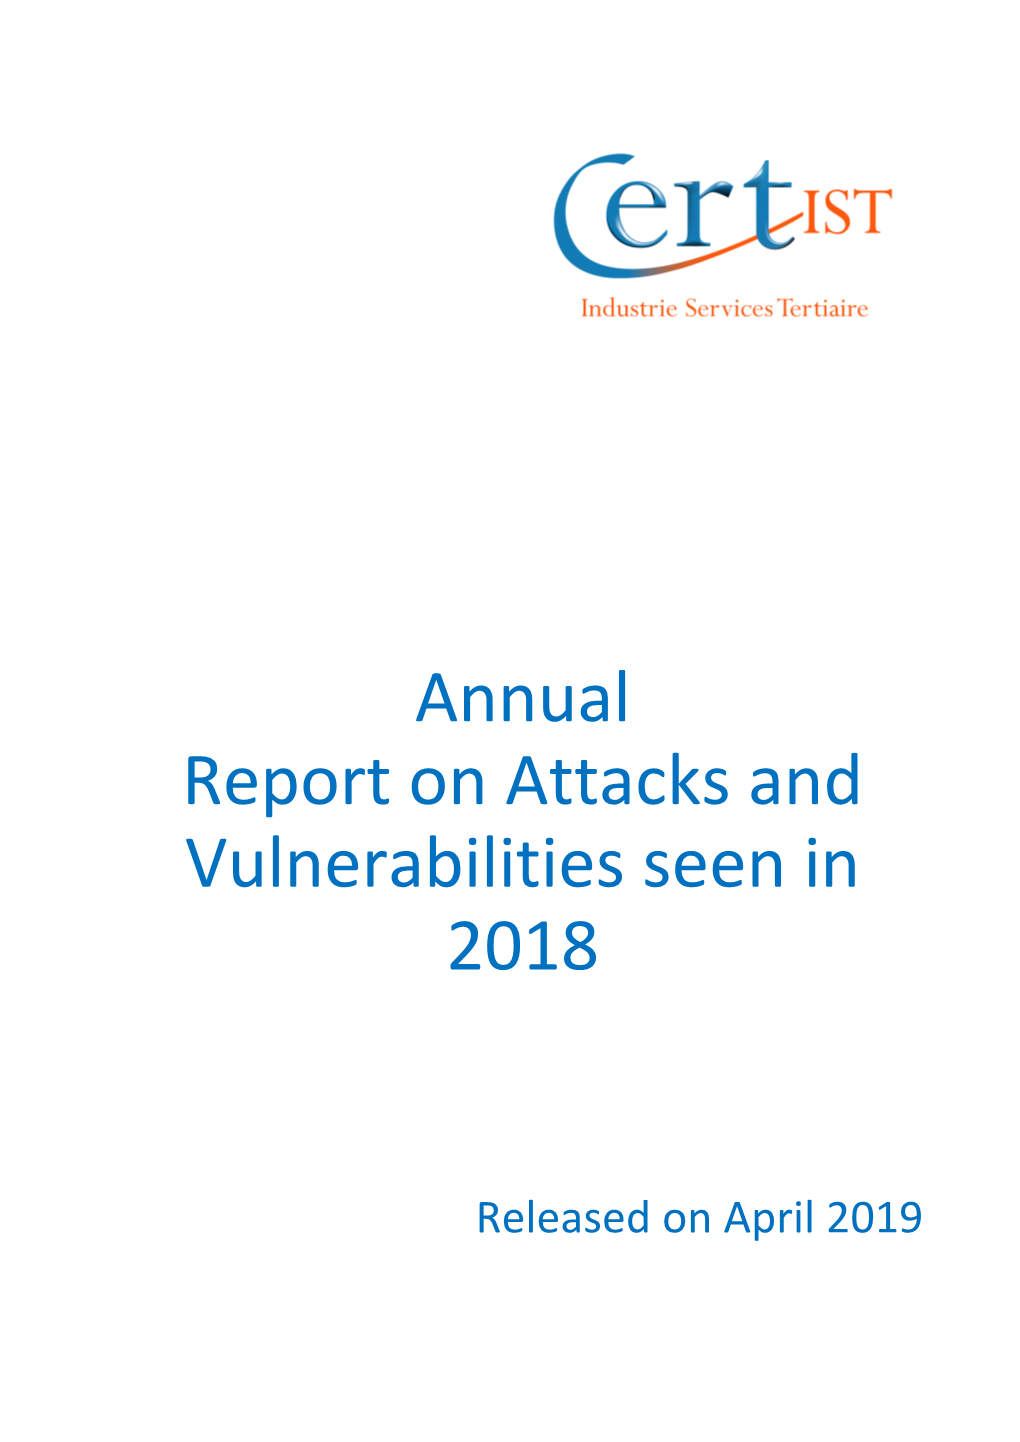 Annual Report on Attacks and Vulnerabilities Seen in 2018